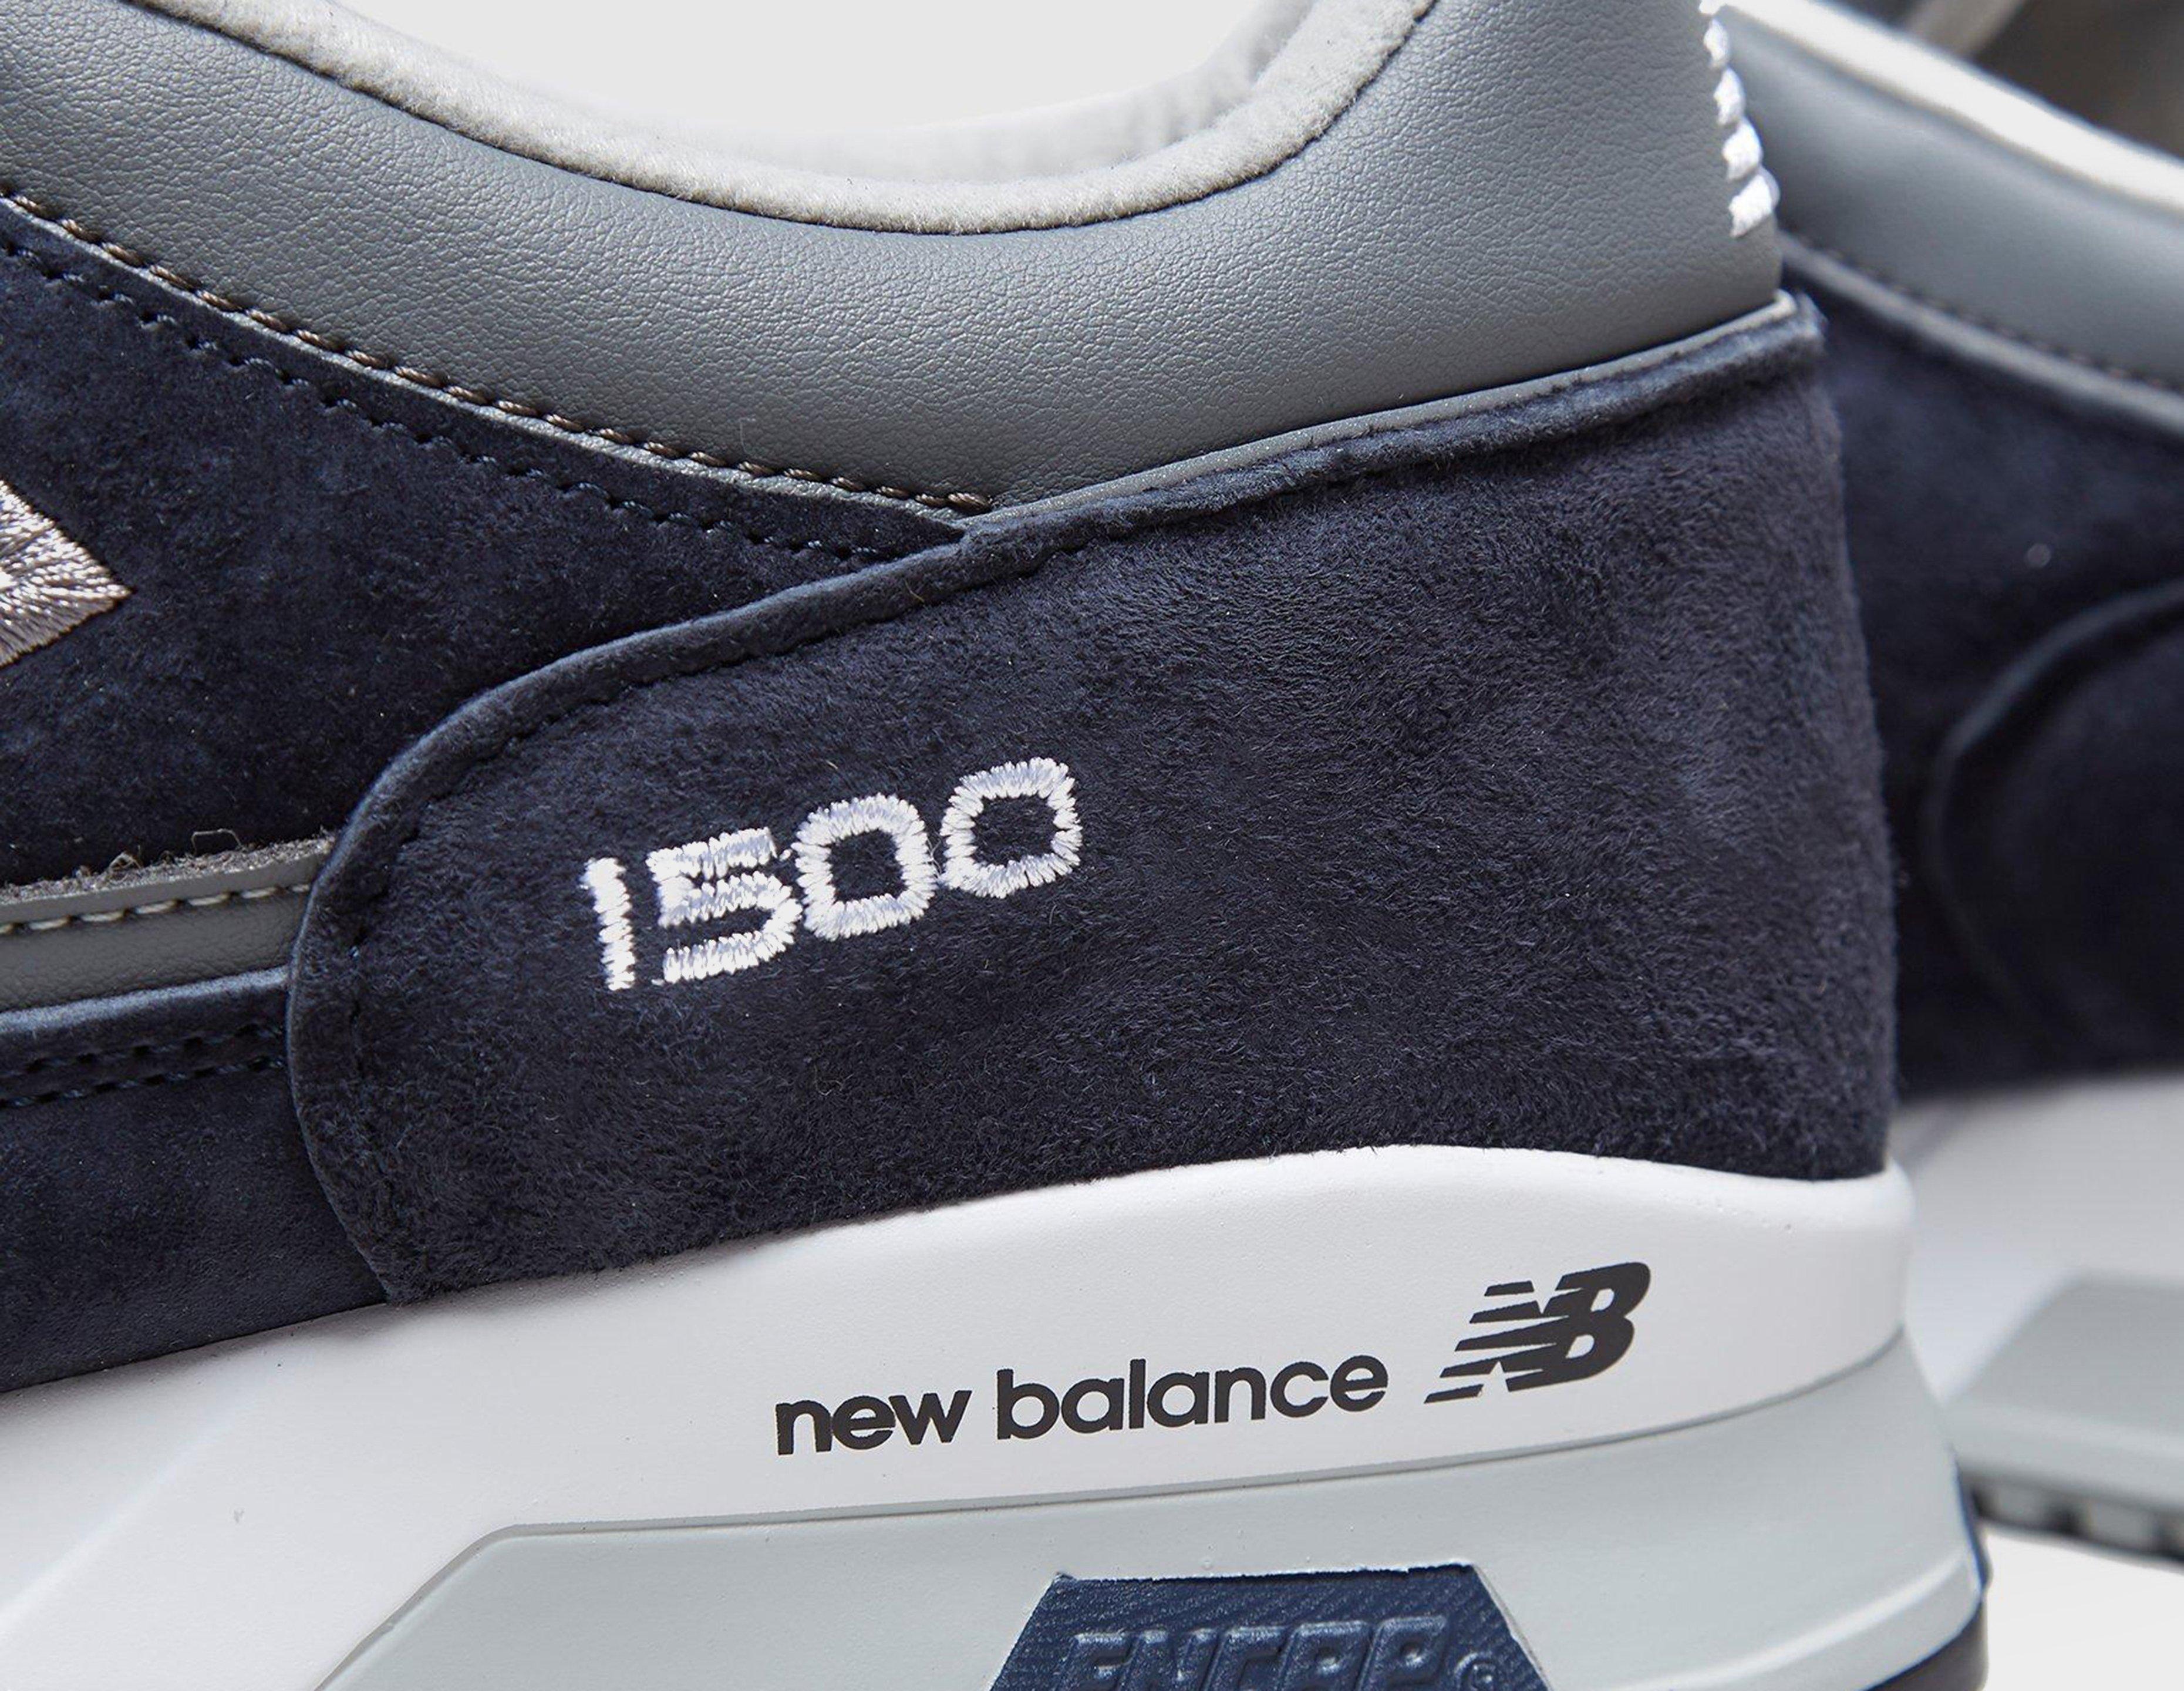 new balance shoes made in uk